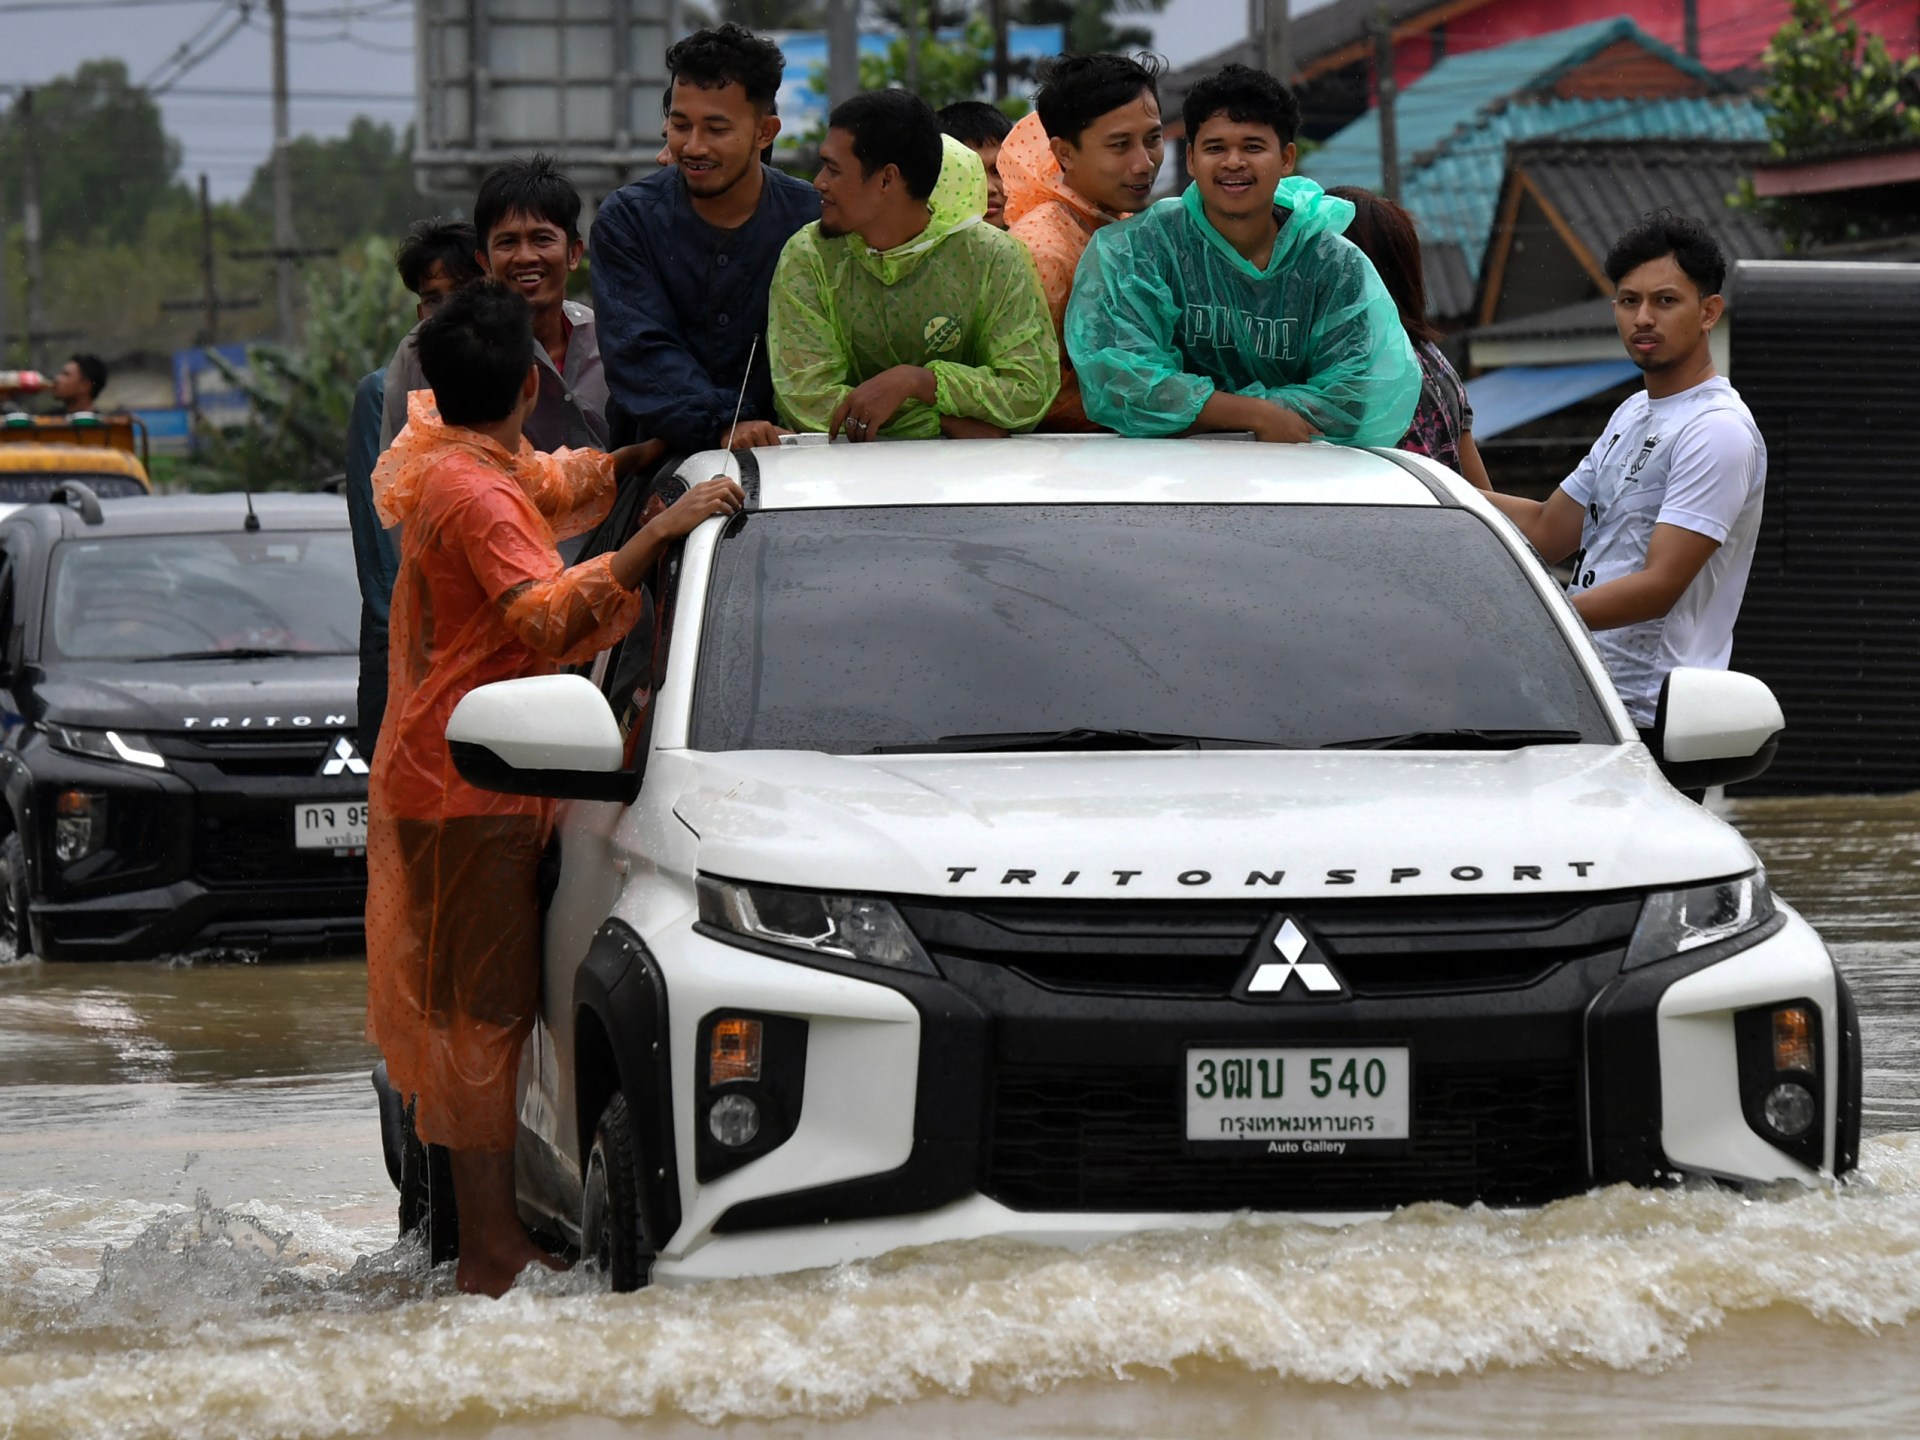 Tens of thousands affected as severe flooding hits Thailand’s south | Floods News